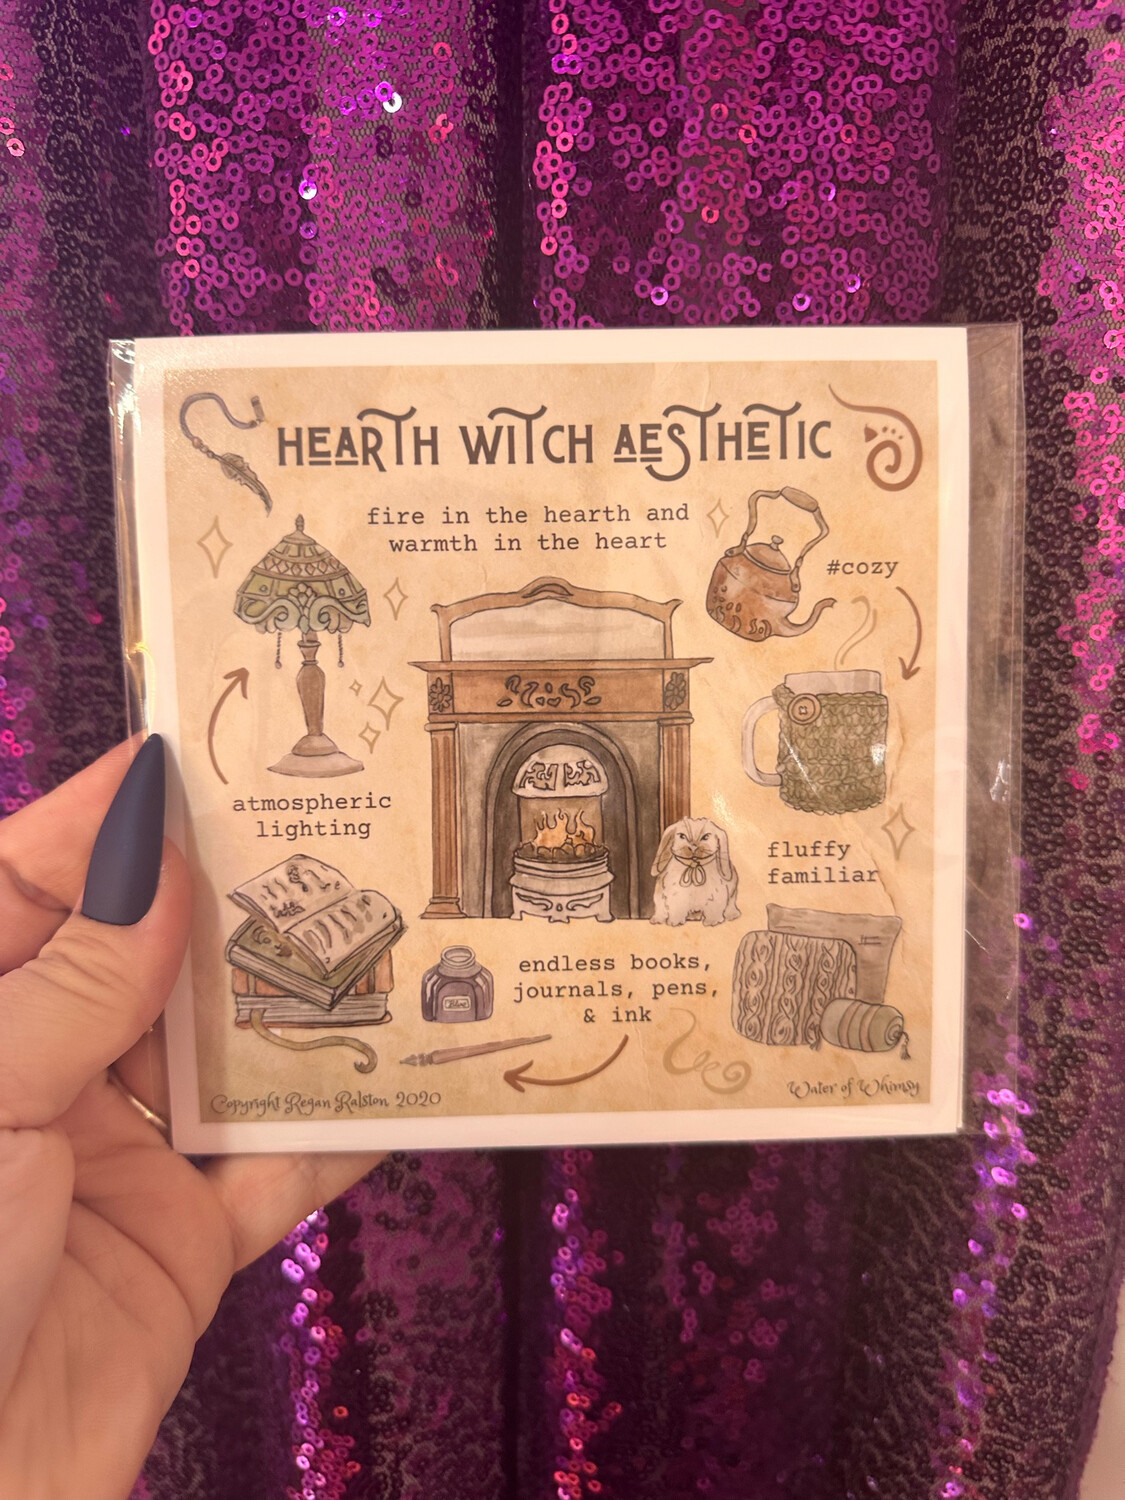 Hearth Witch Aesthetic